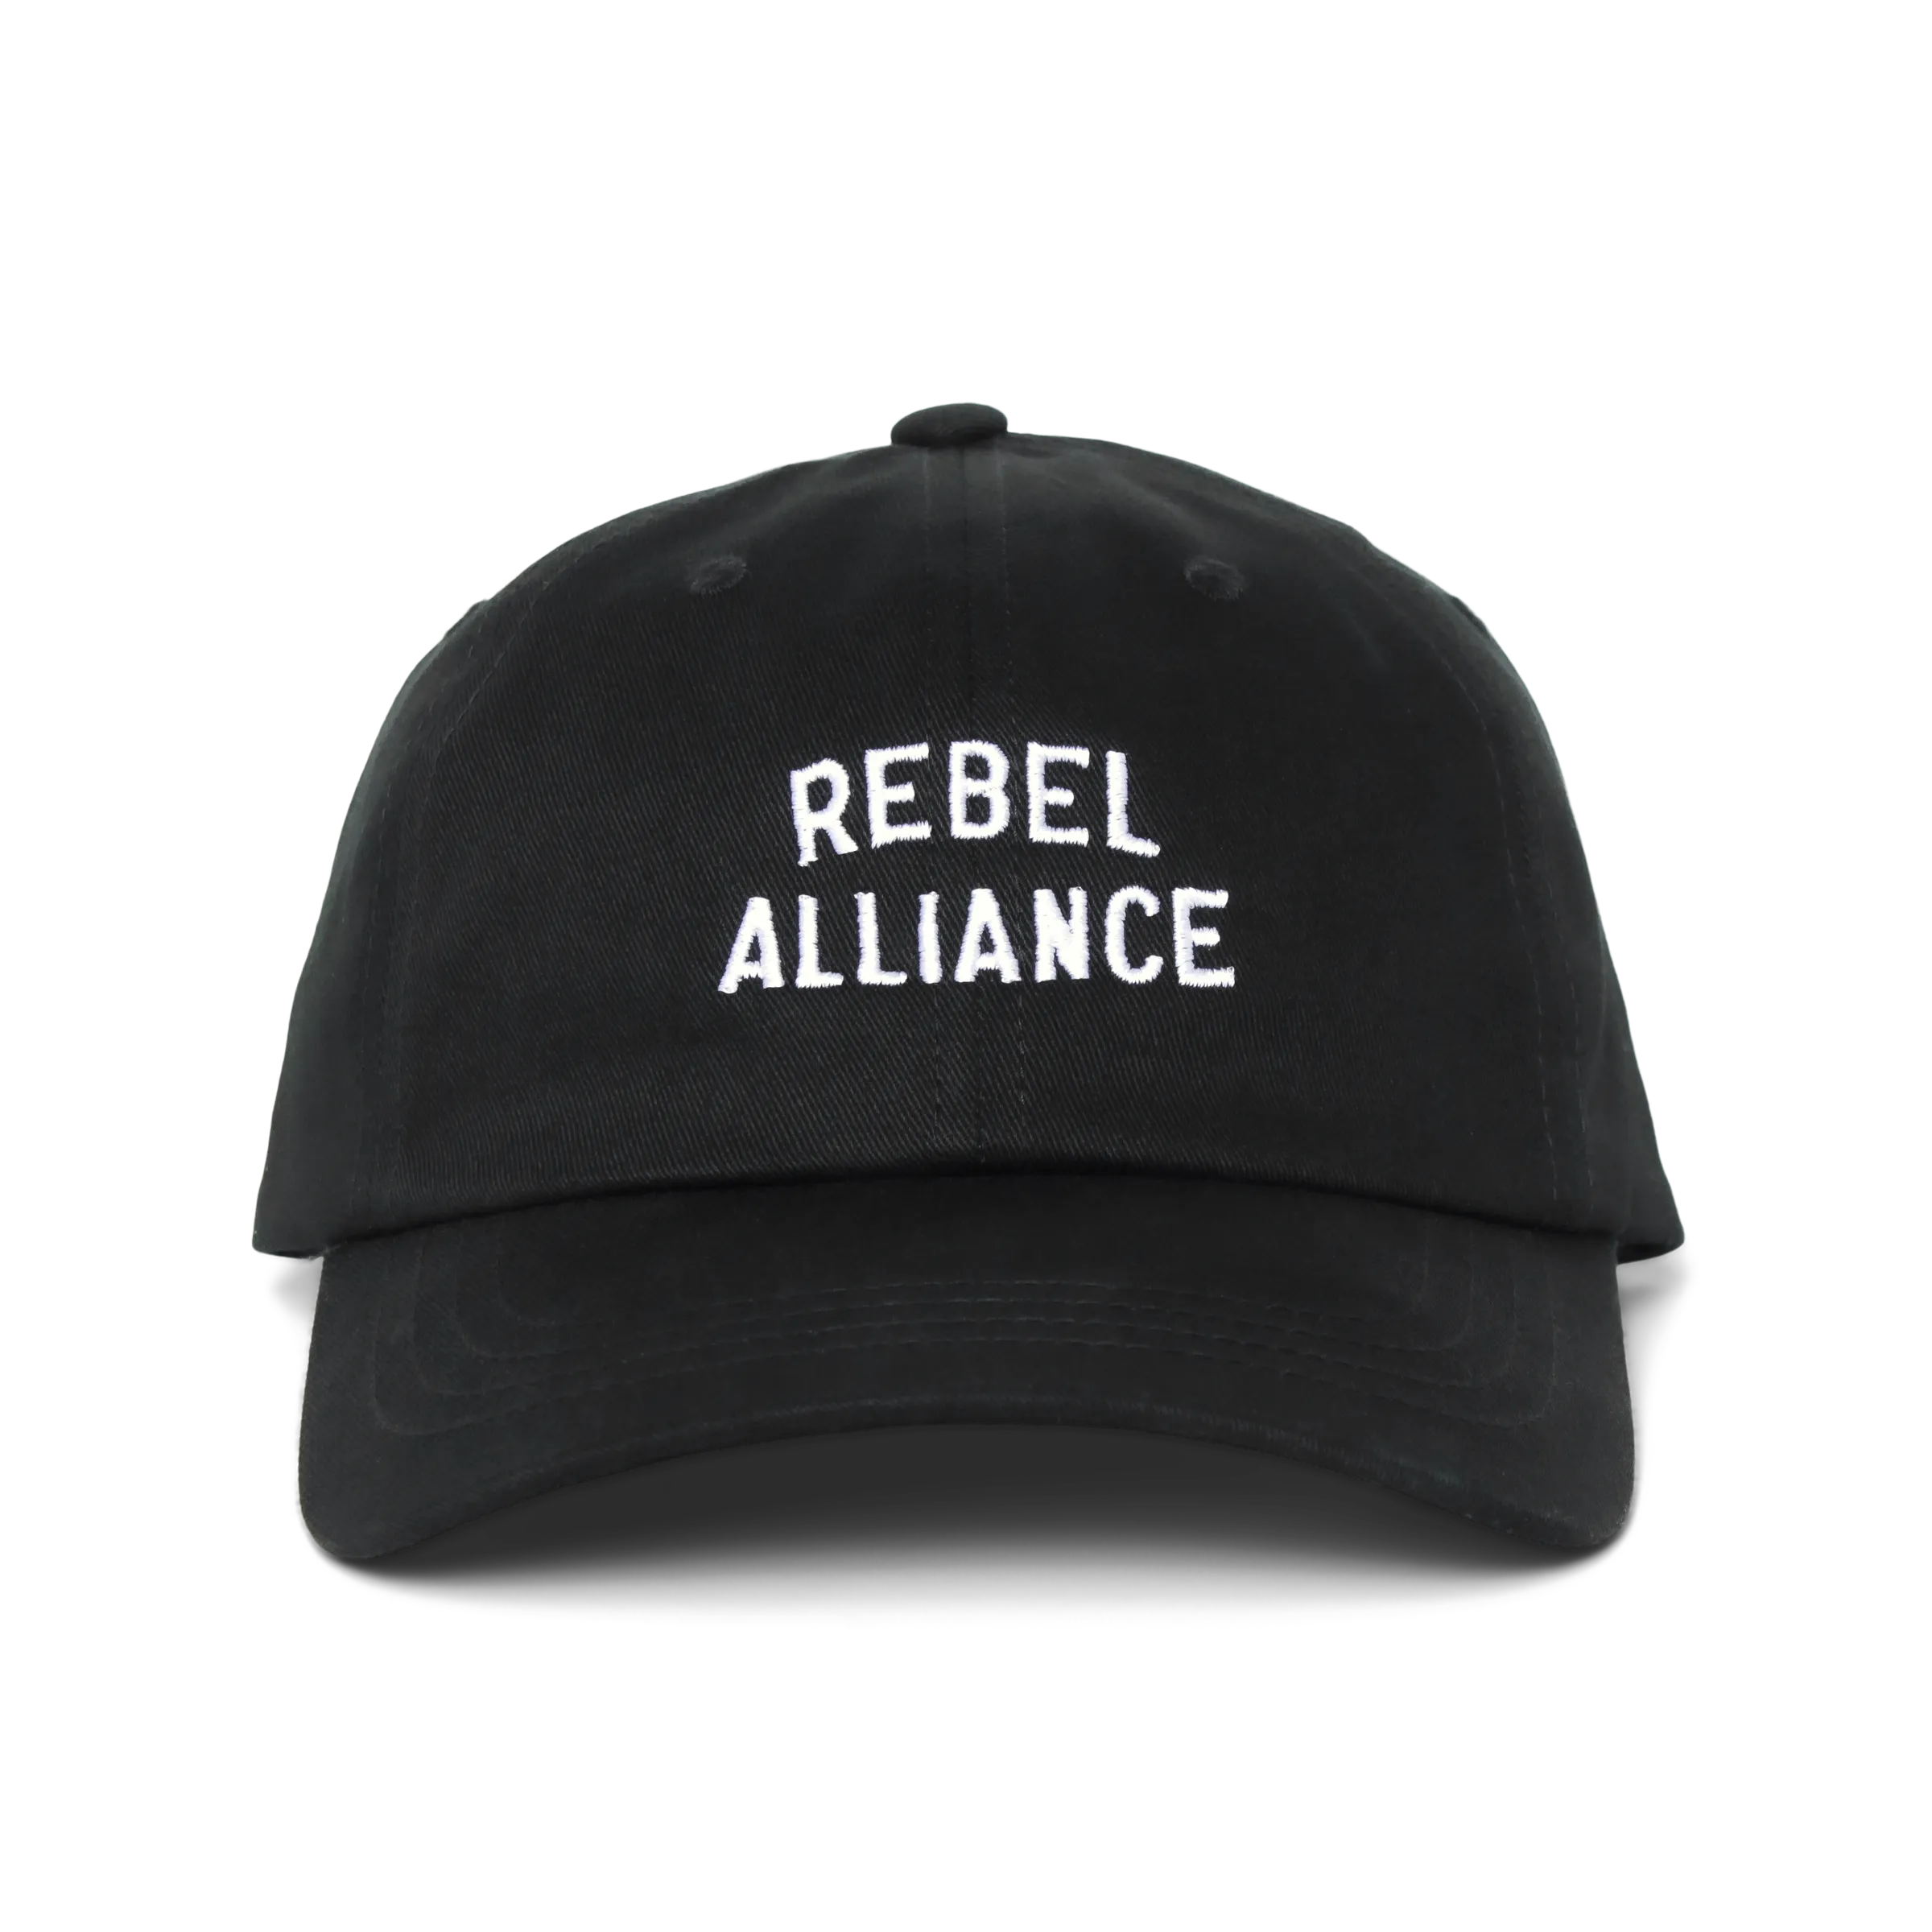 Rebel Alliance Hat” graphic dad hat by Christopher Michon.